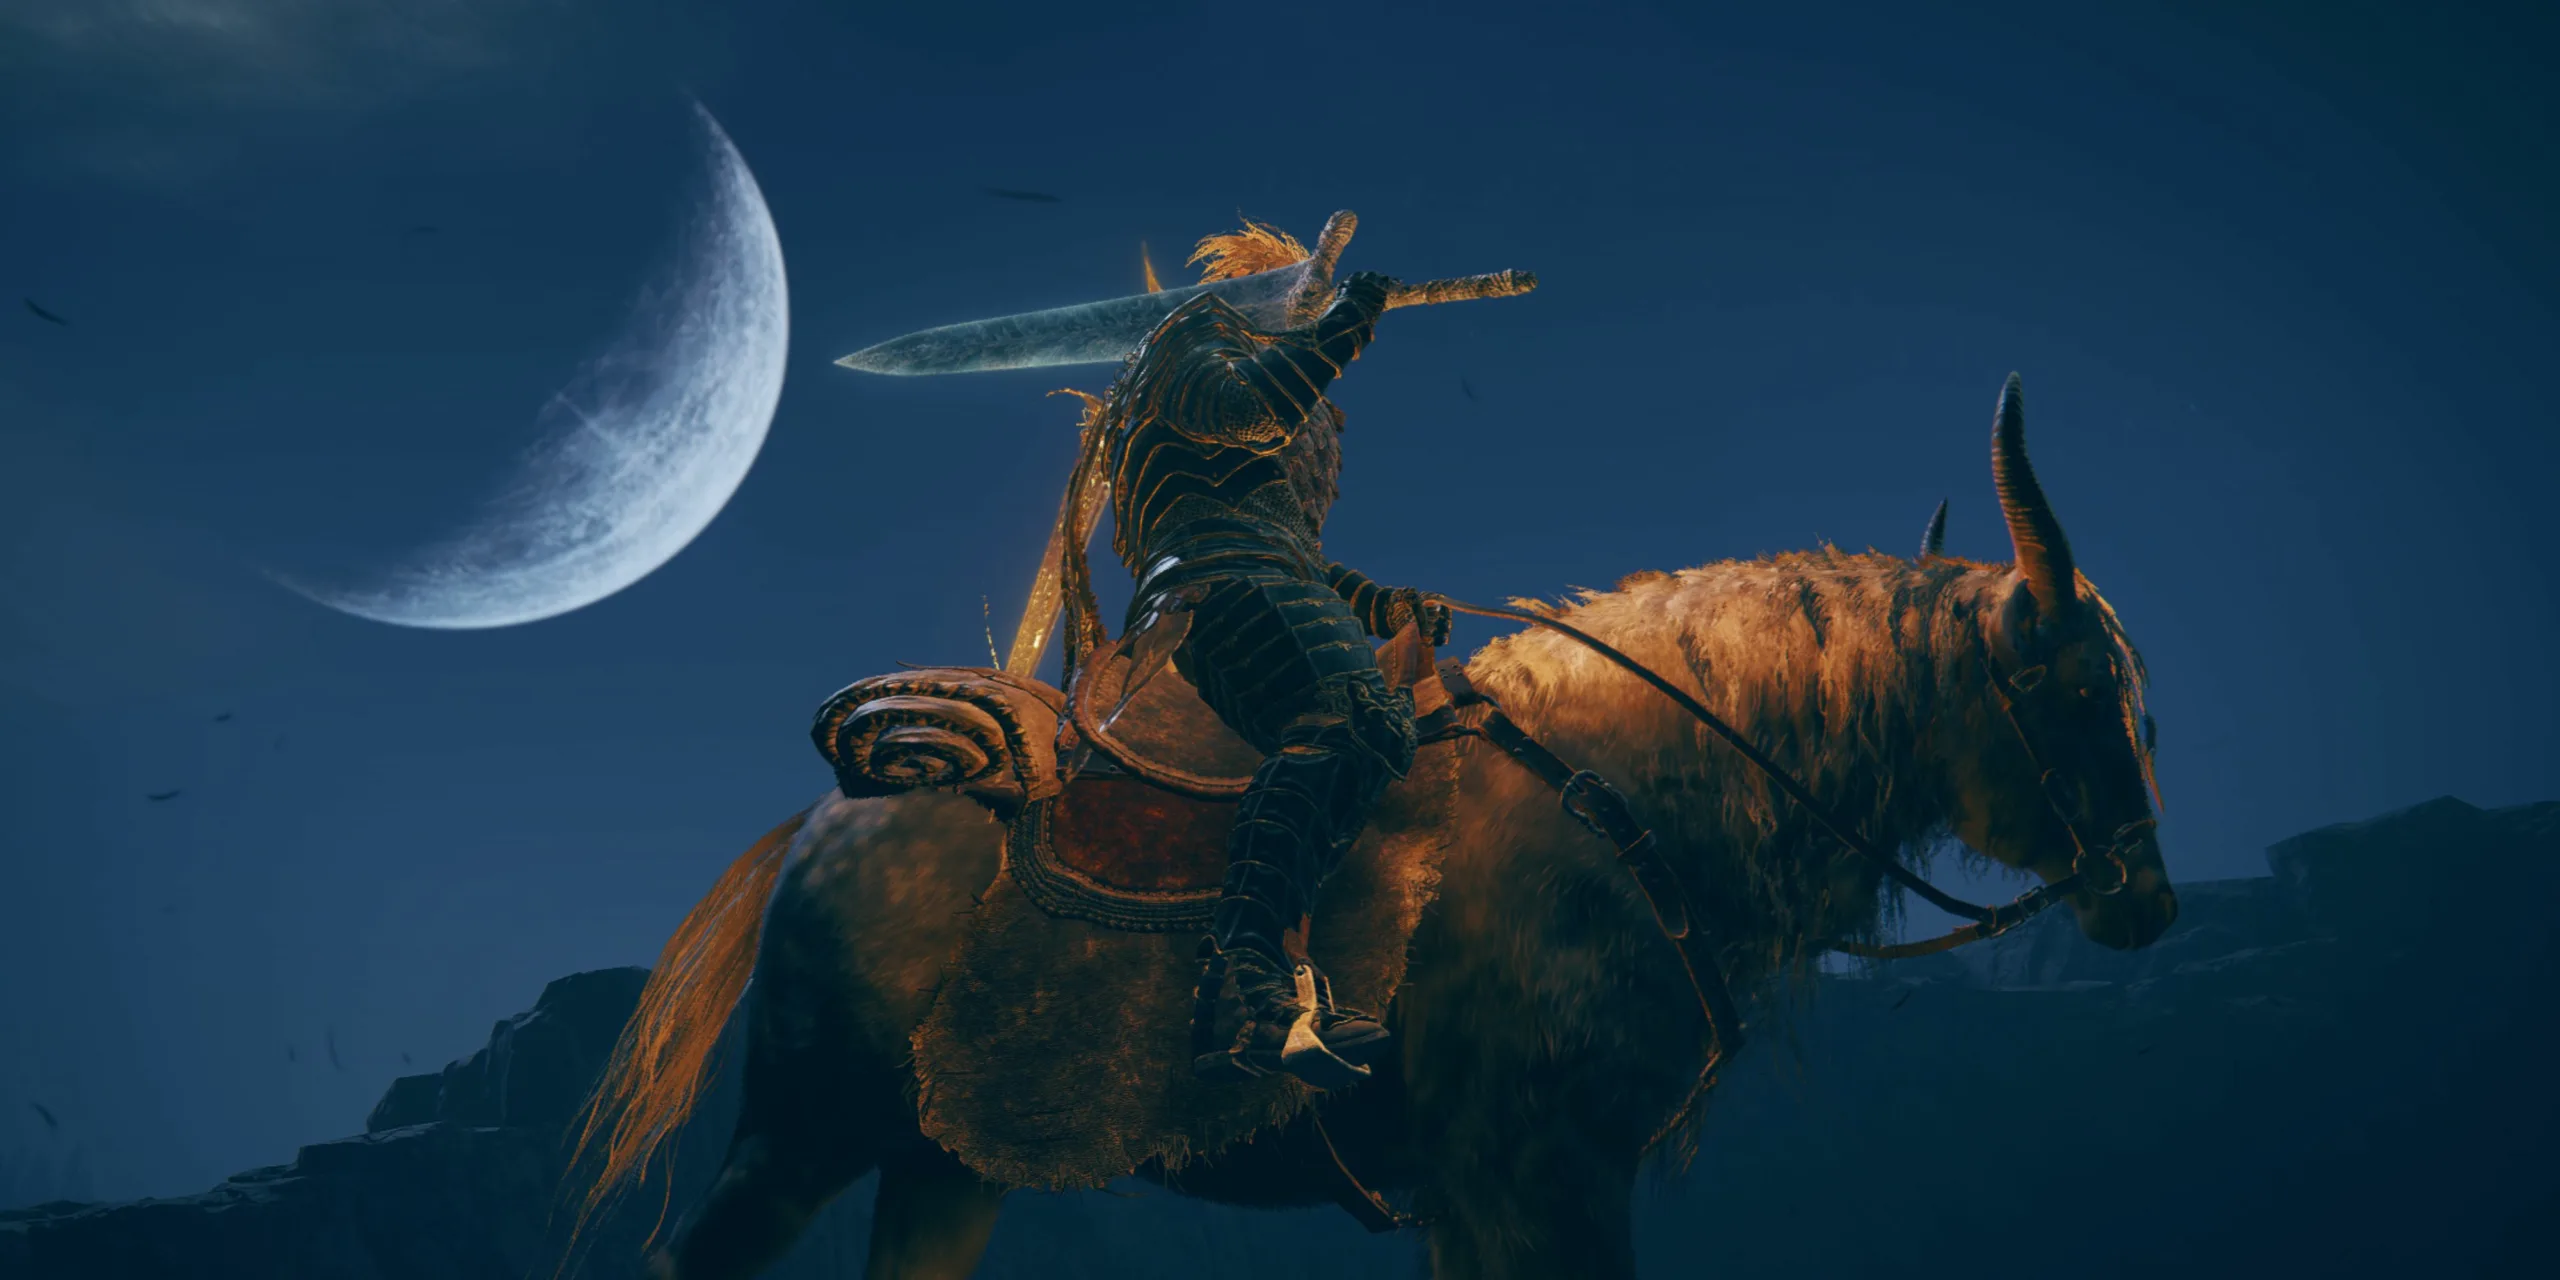 tarnished is riding torrent his mount in a lovely night where the moon is visible elden ring shadow scaled